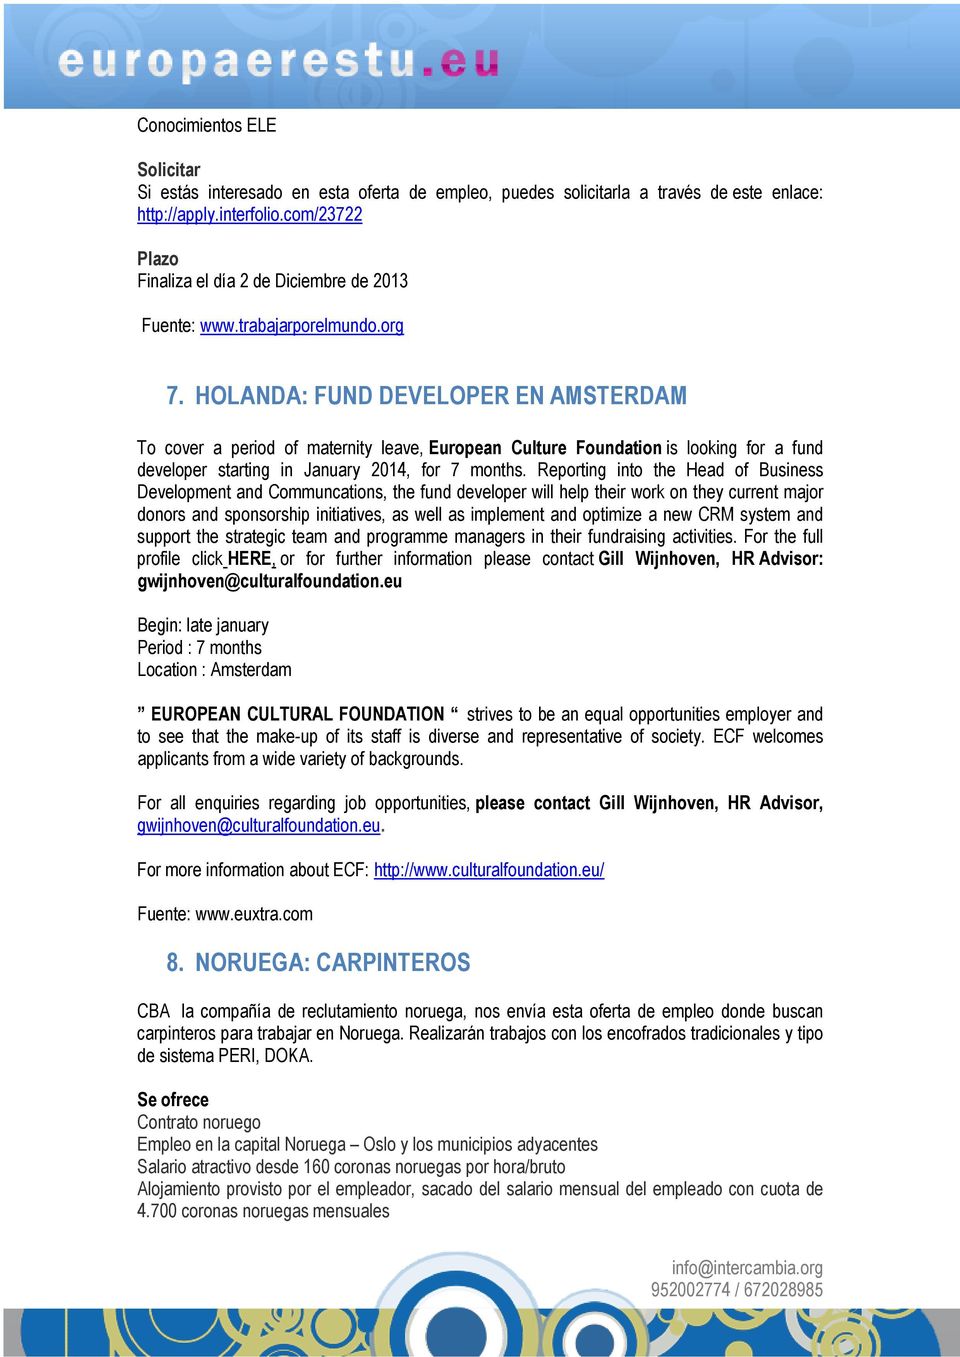 HOLANDA: FUND DEVELOPER EN AMSTERDAM To cover a period of maternity leave, European Culture Foundation is looking for a fund developer starting in January 2014, for 7 months.